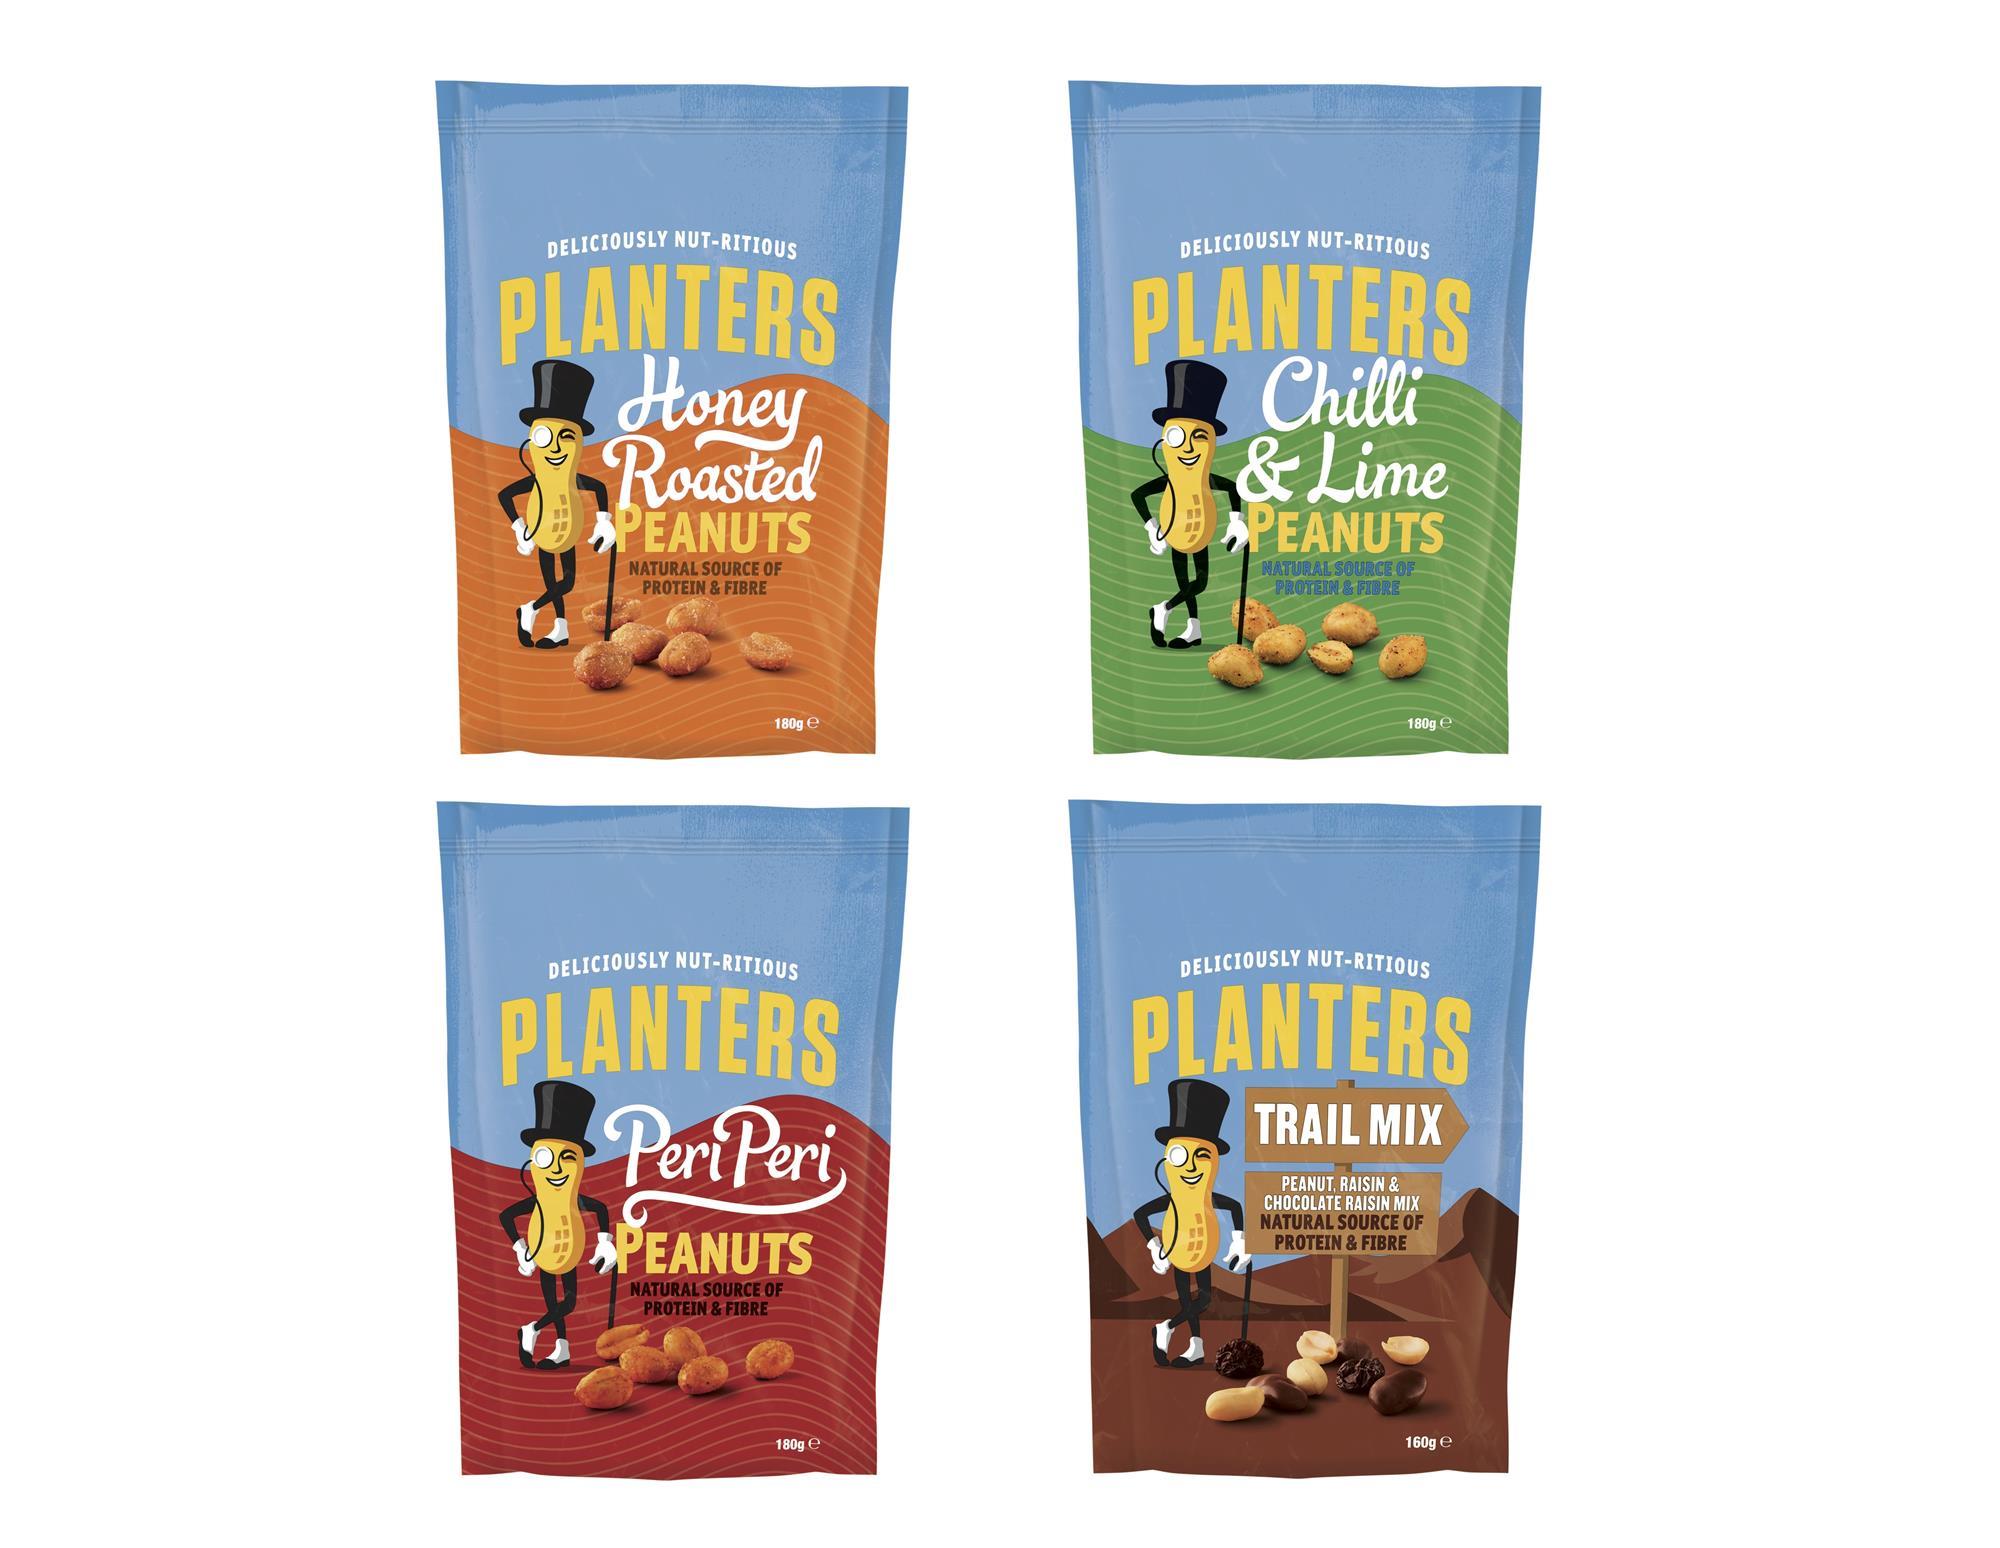 Kraft Heinz brings Planters nuts to UK | Product News | Convenience Store